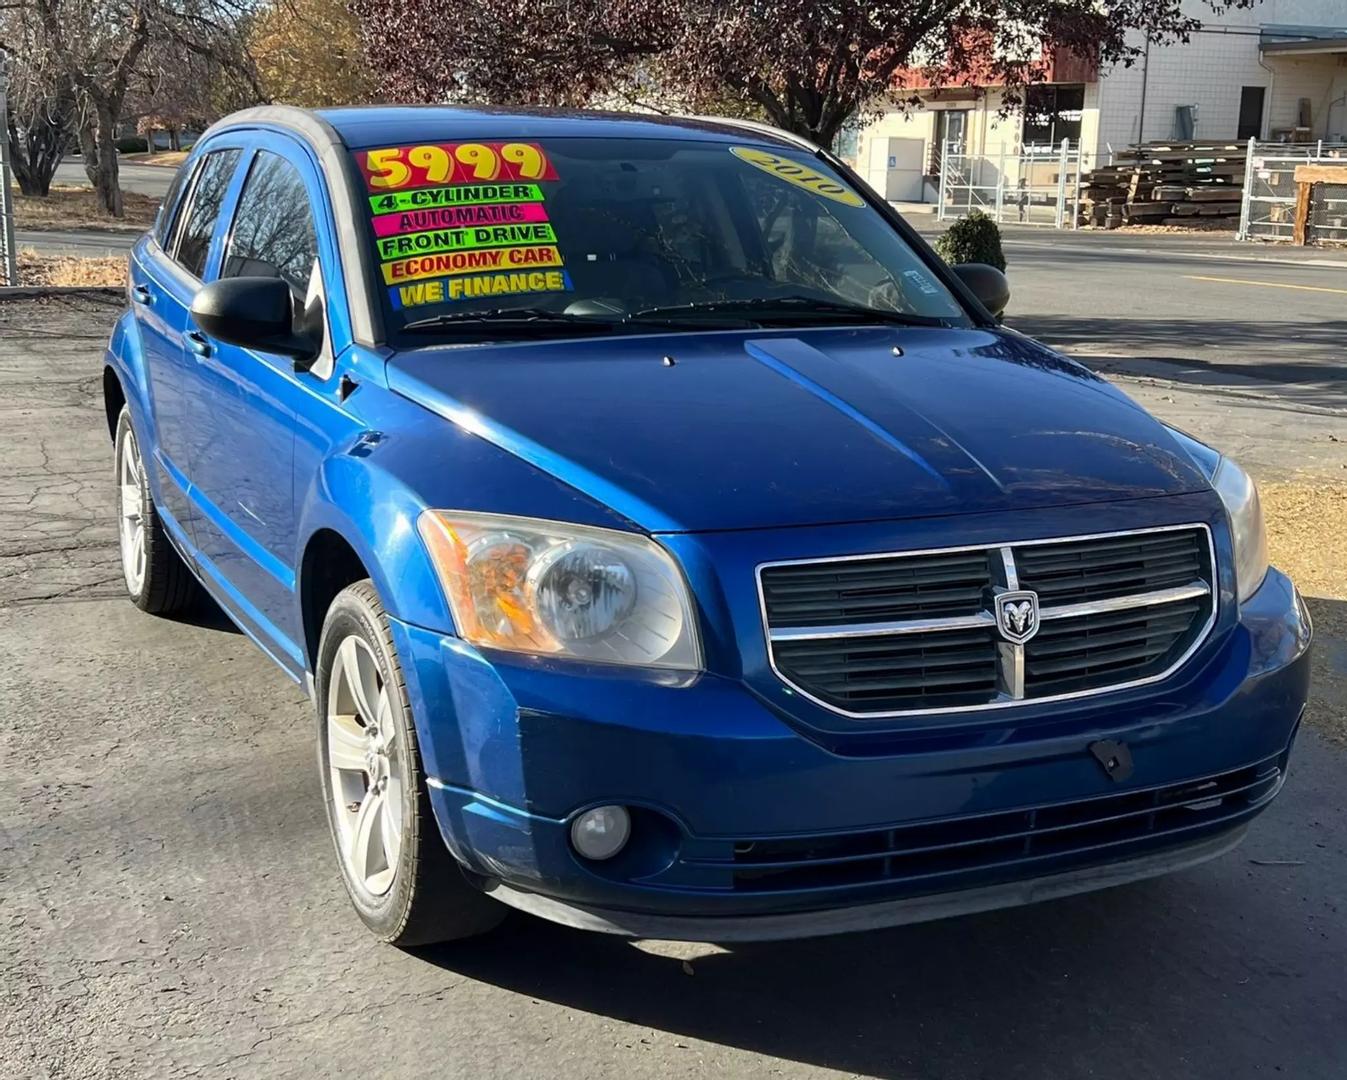 Used 2010 Dodge Caliber's in Parlier, California for sale - MotorCloud